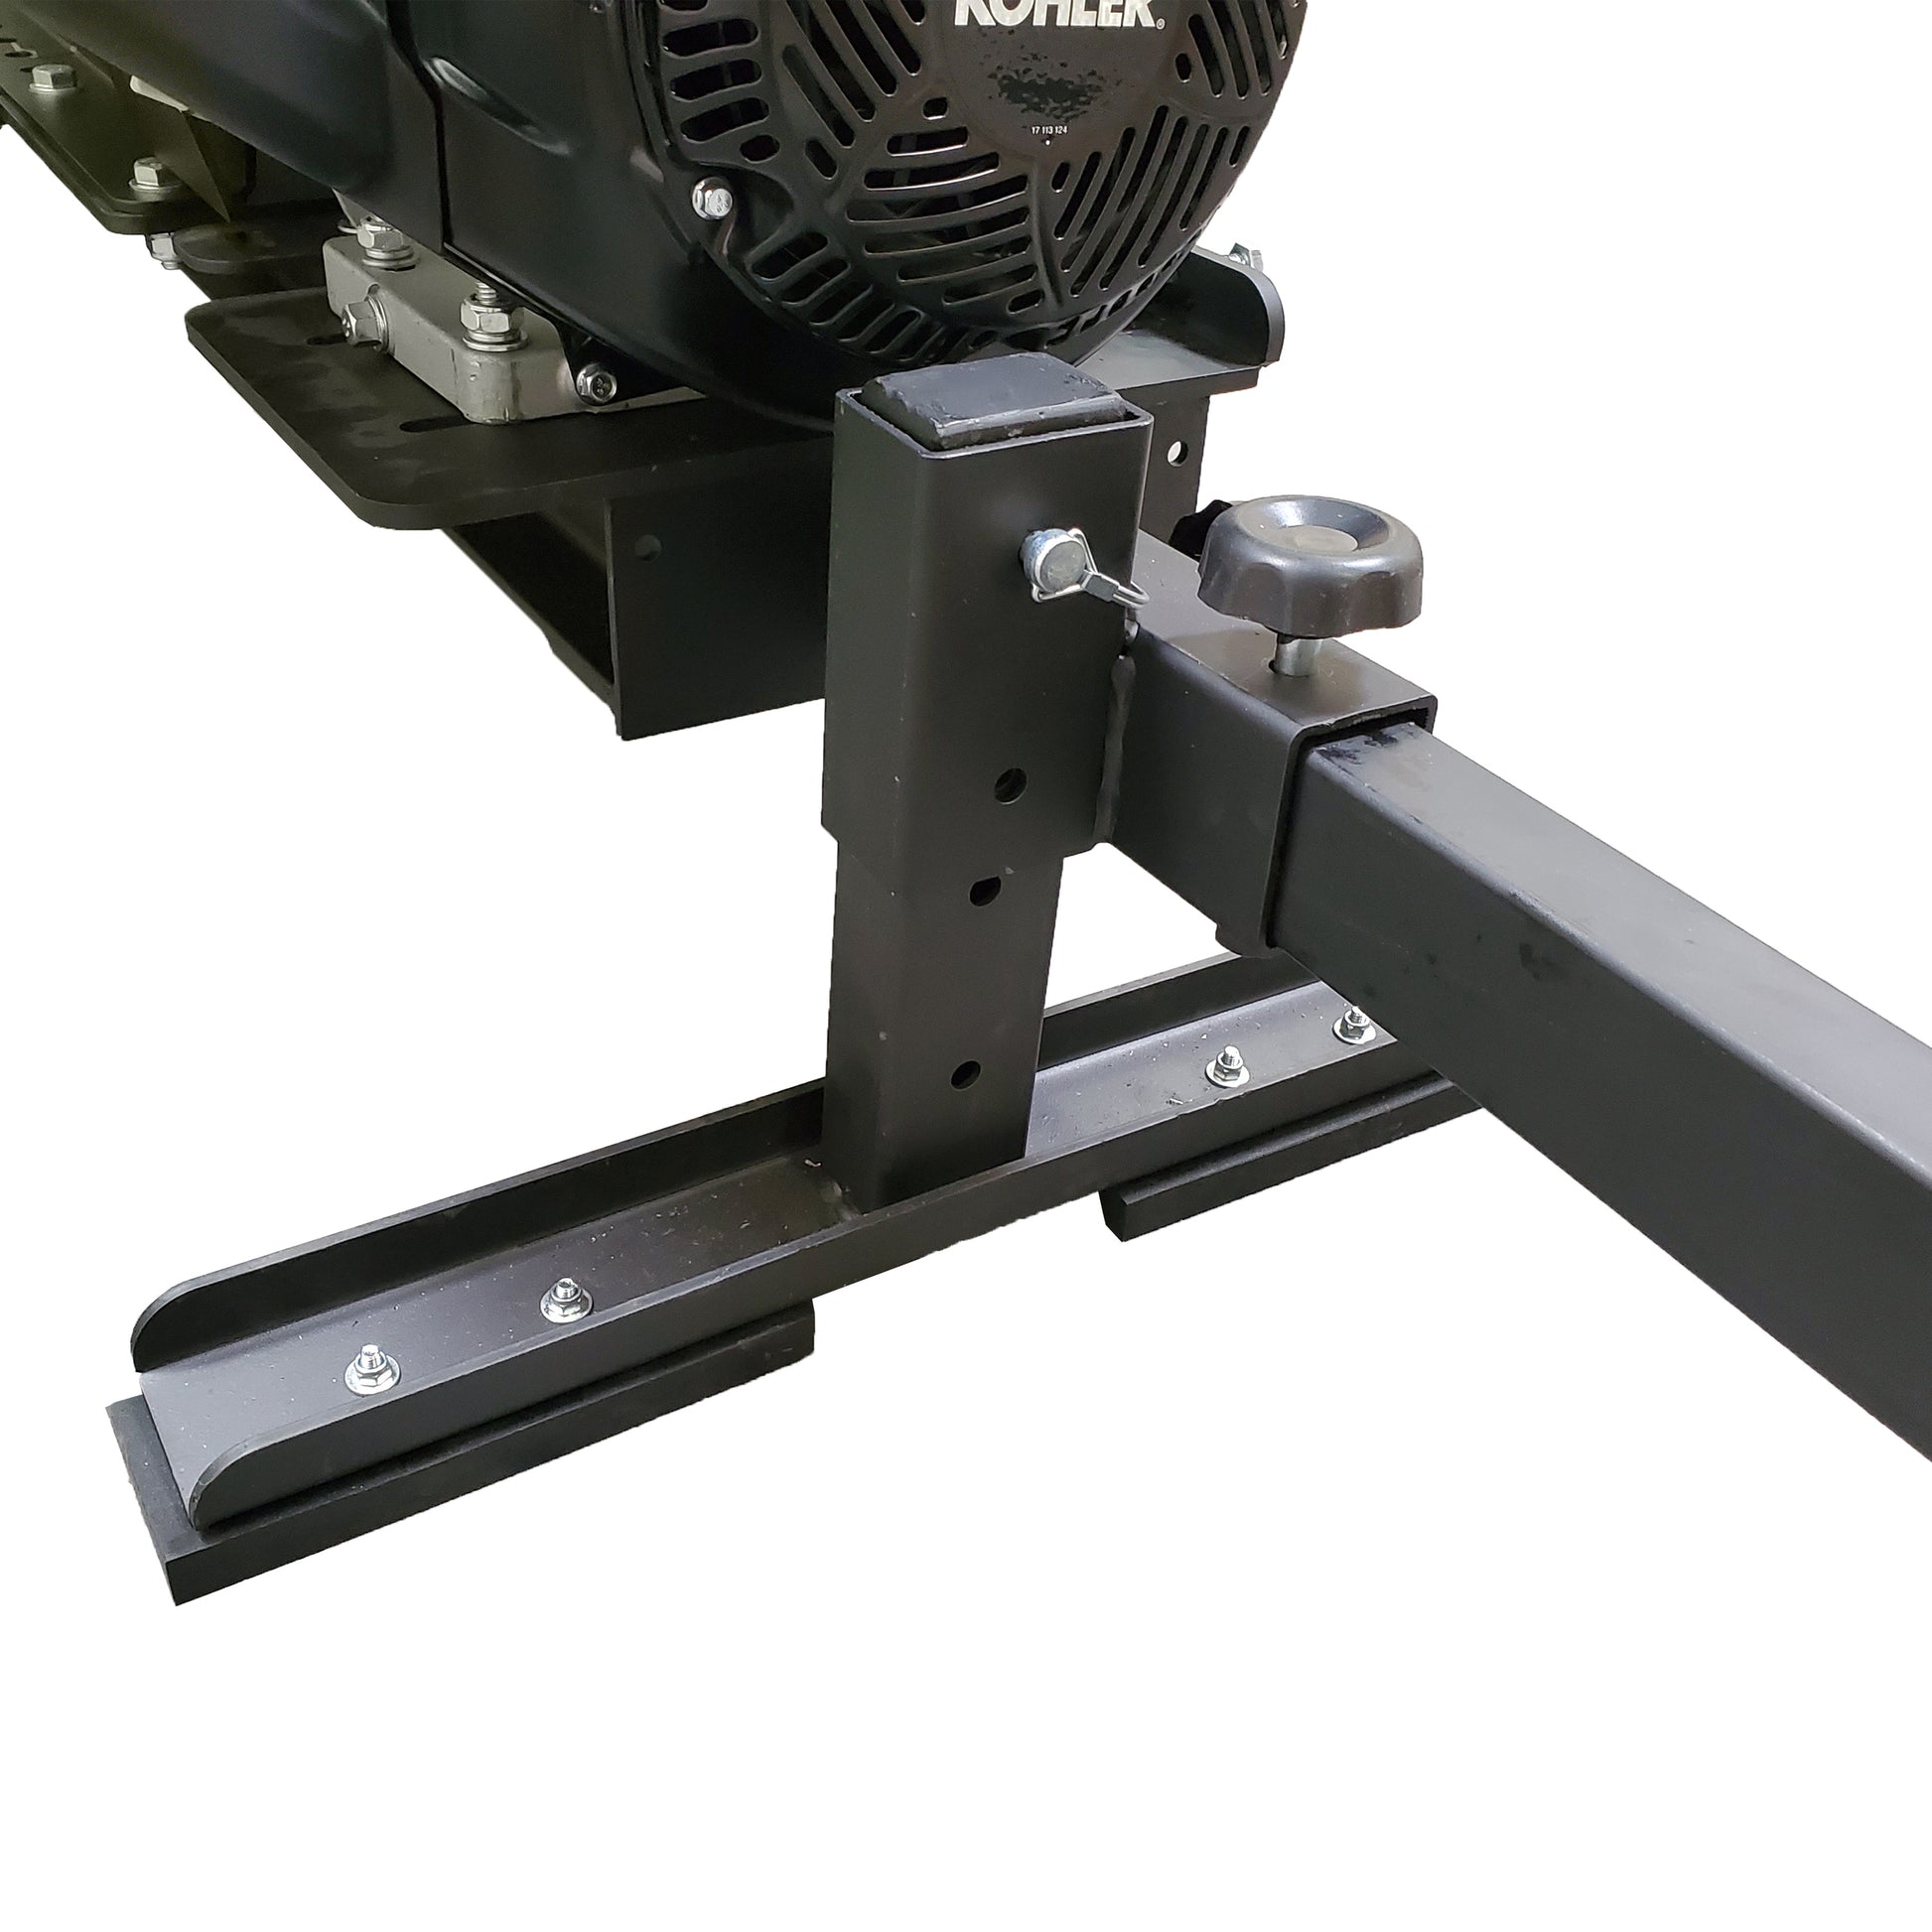 Detail K2 5 Inch 14 HP Chipper with Electric Starter - OPC505AE-Wood Splitter Outlet